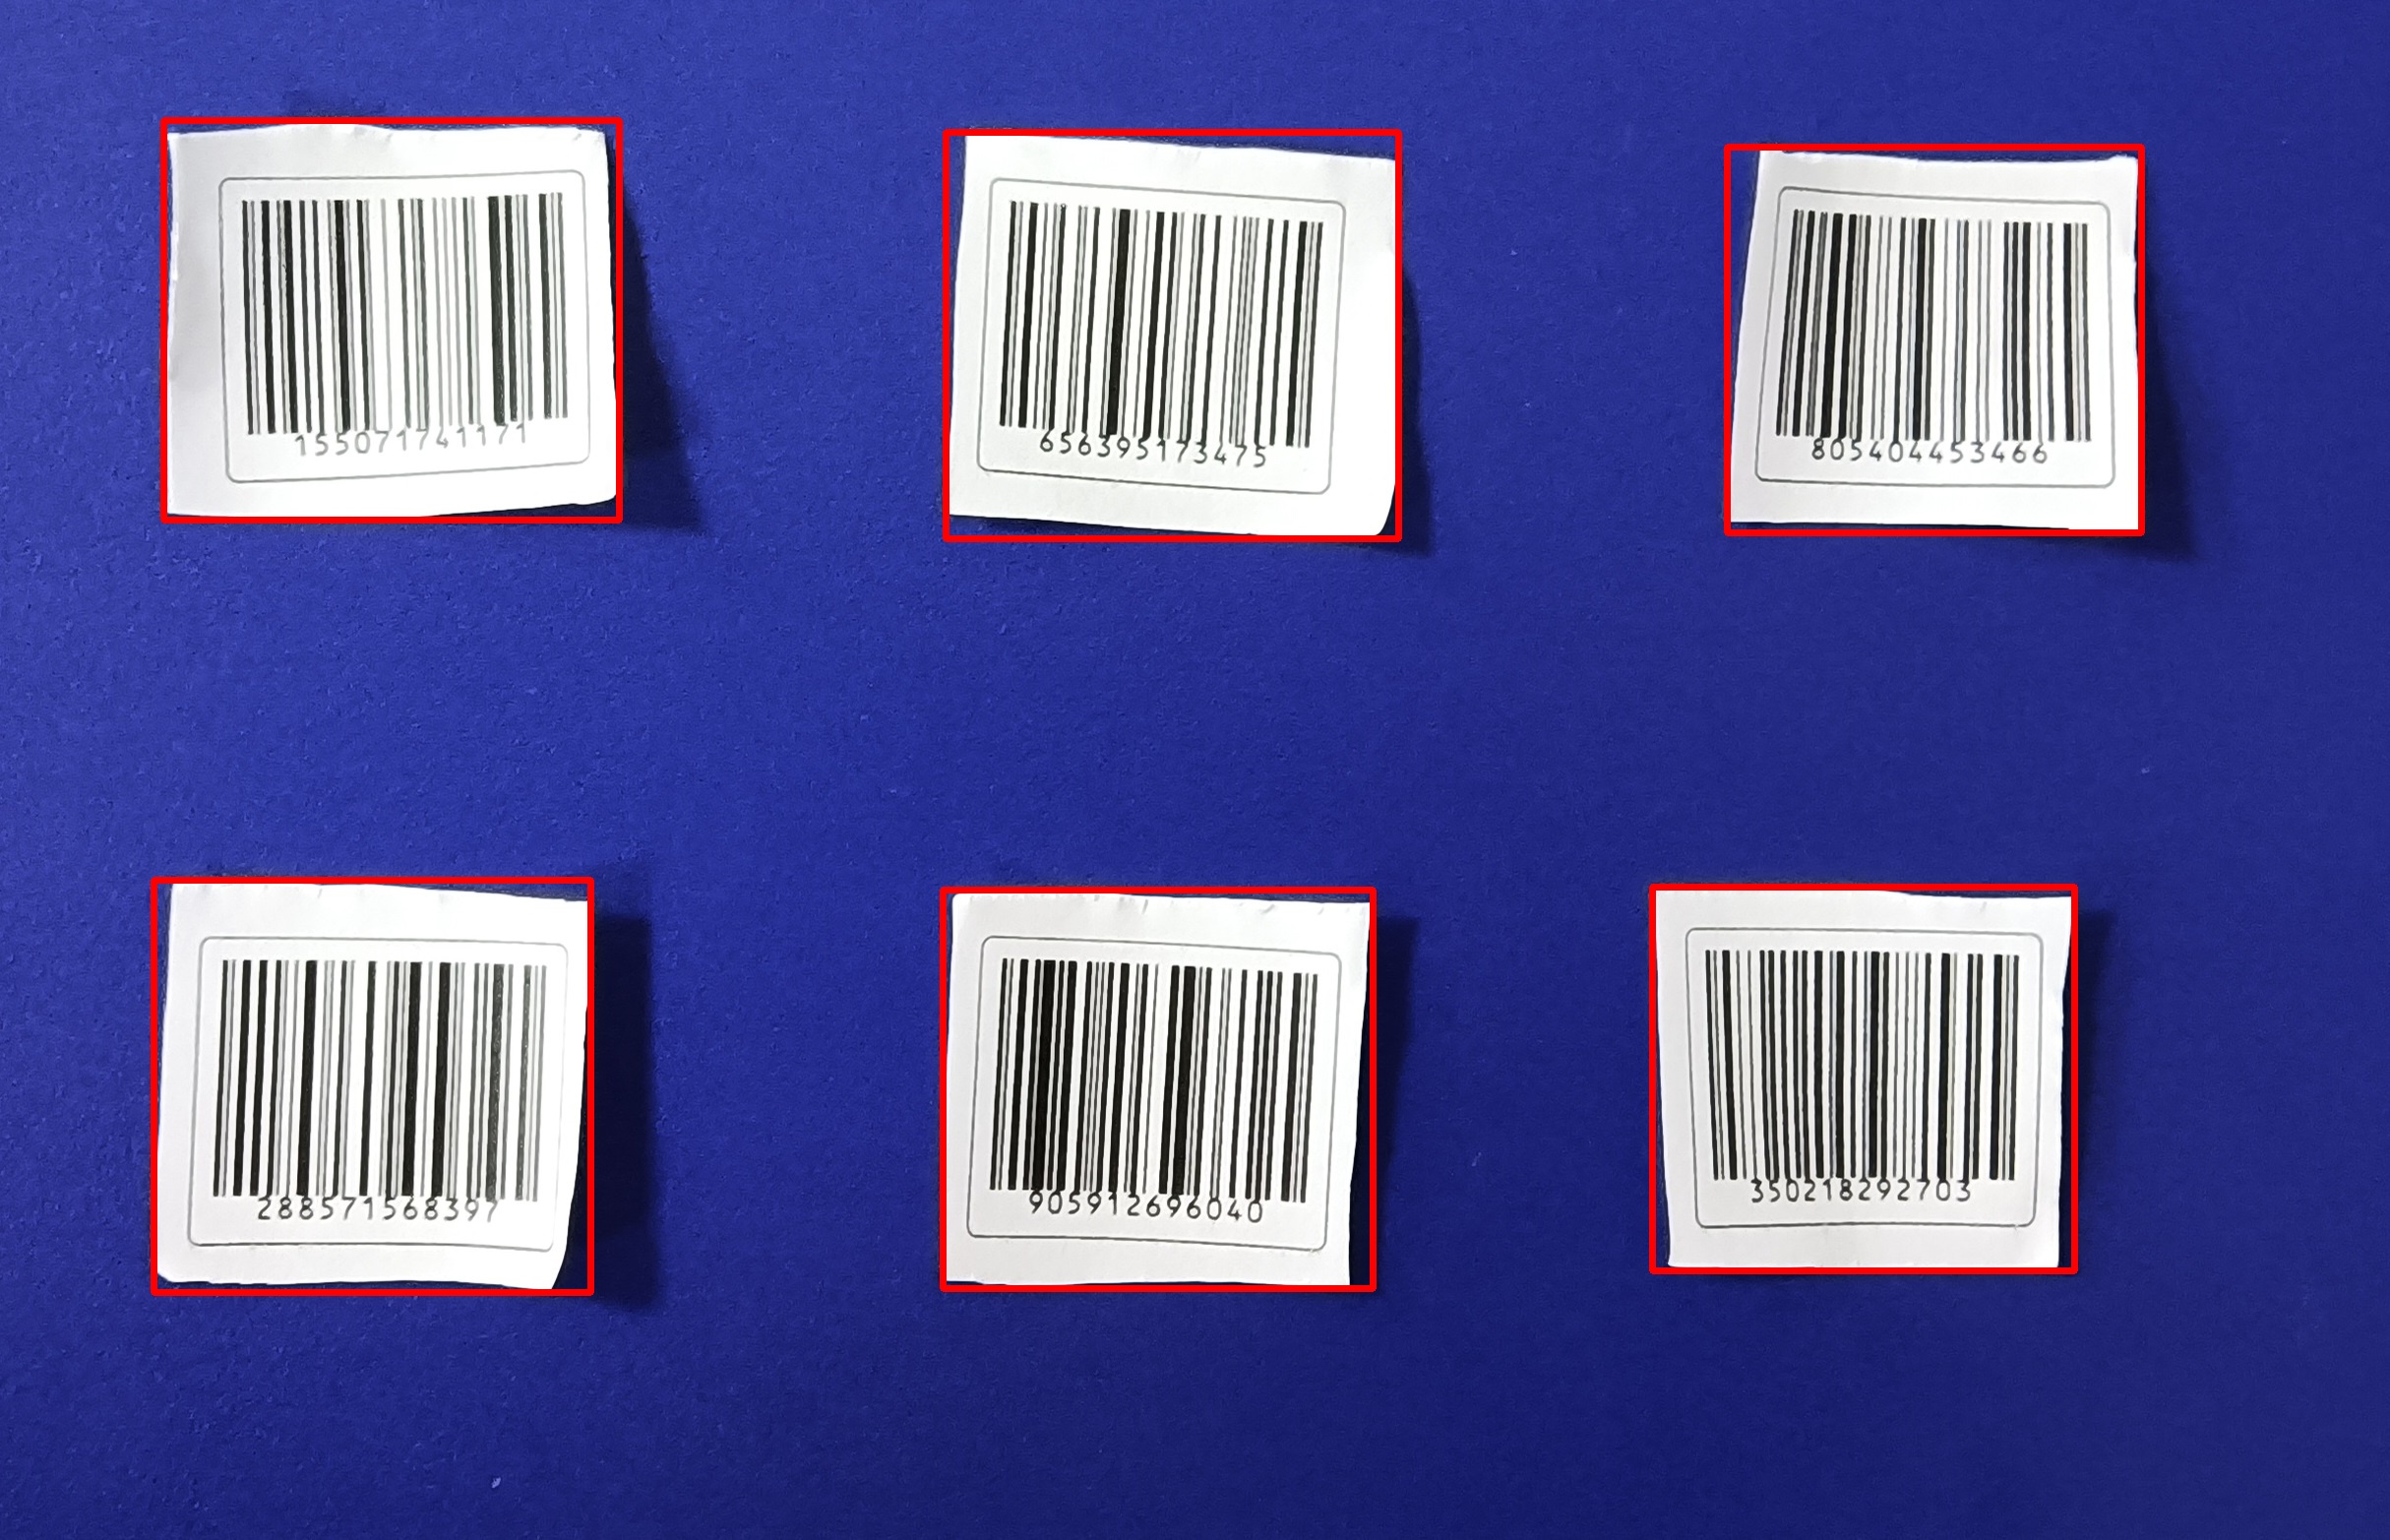 barcodes on labels detected